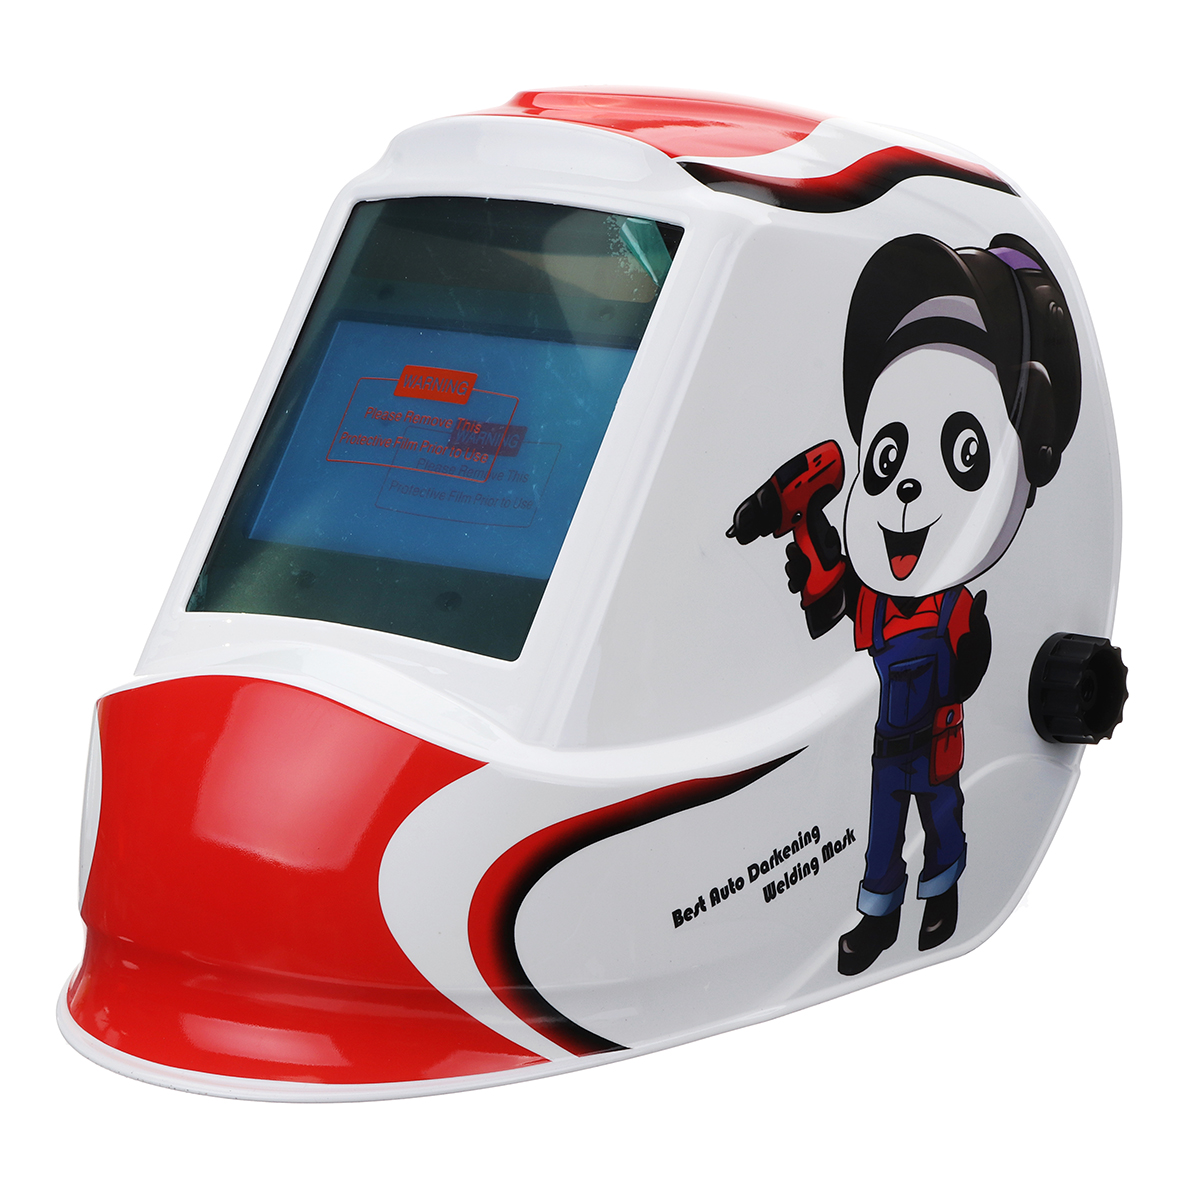 Solar-Power-Automatic-Dimming-Welding-Helmet-Welding-Mask-Large-Vision-Window-1430637-7